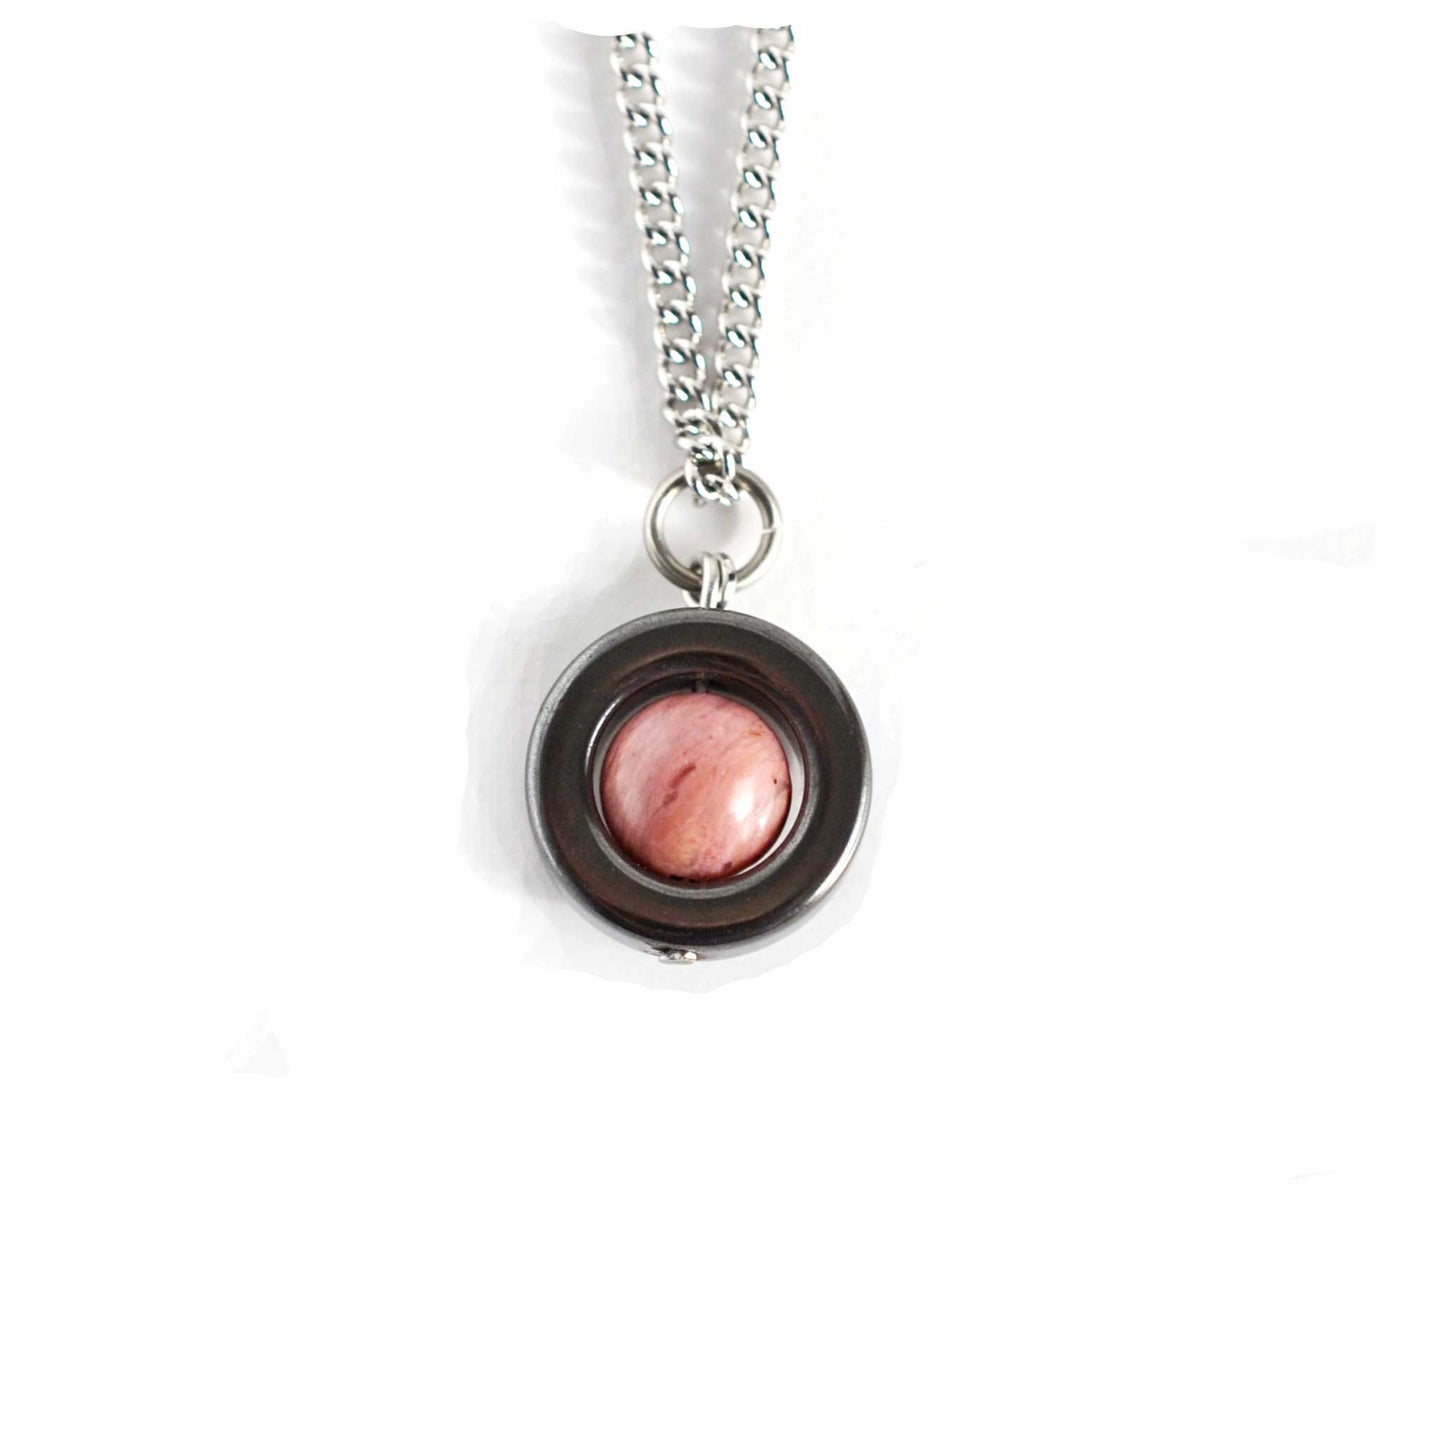 Hematite and dusky pink Rhodonite spinner necklace on white background.